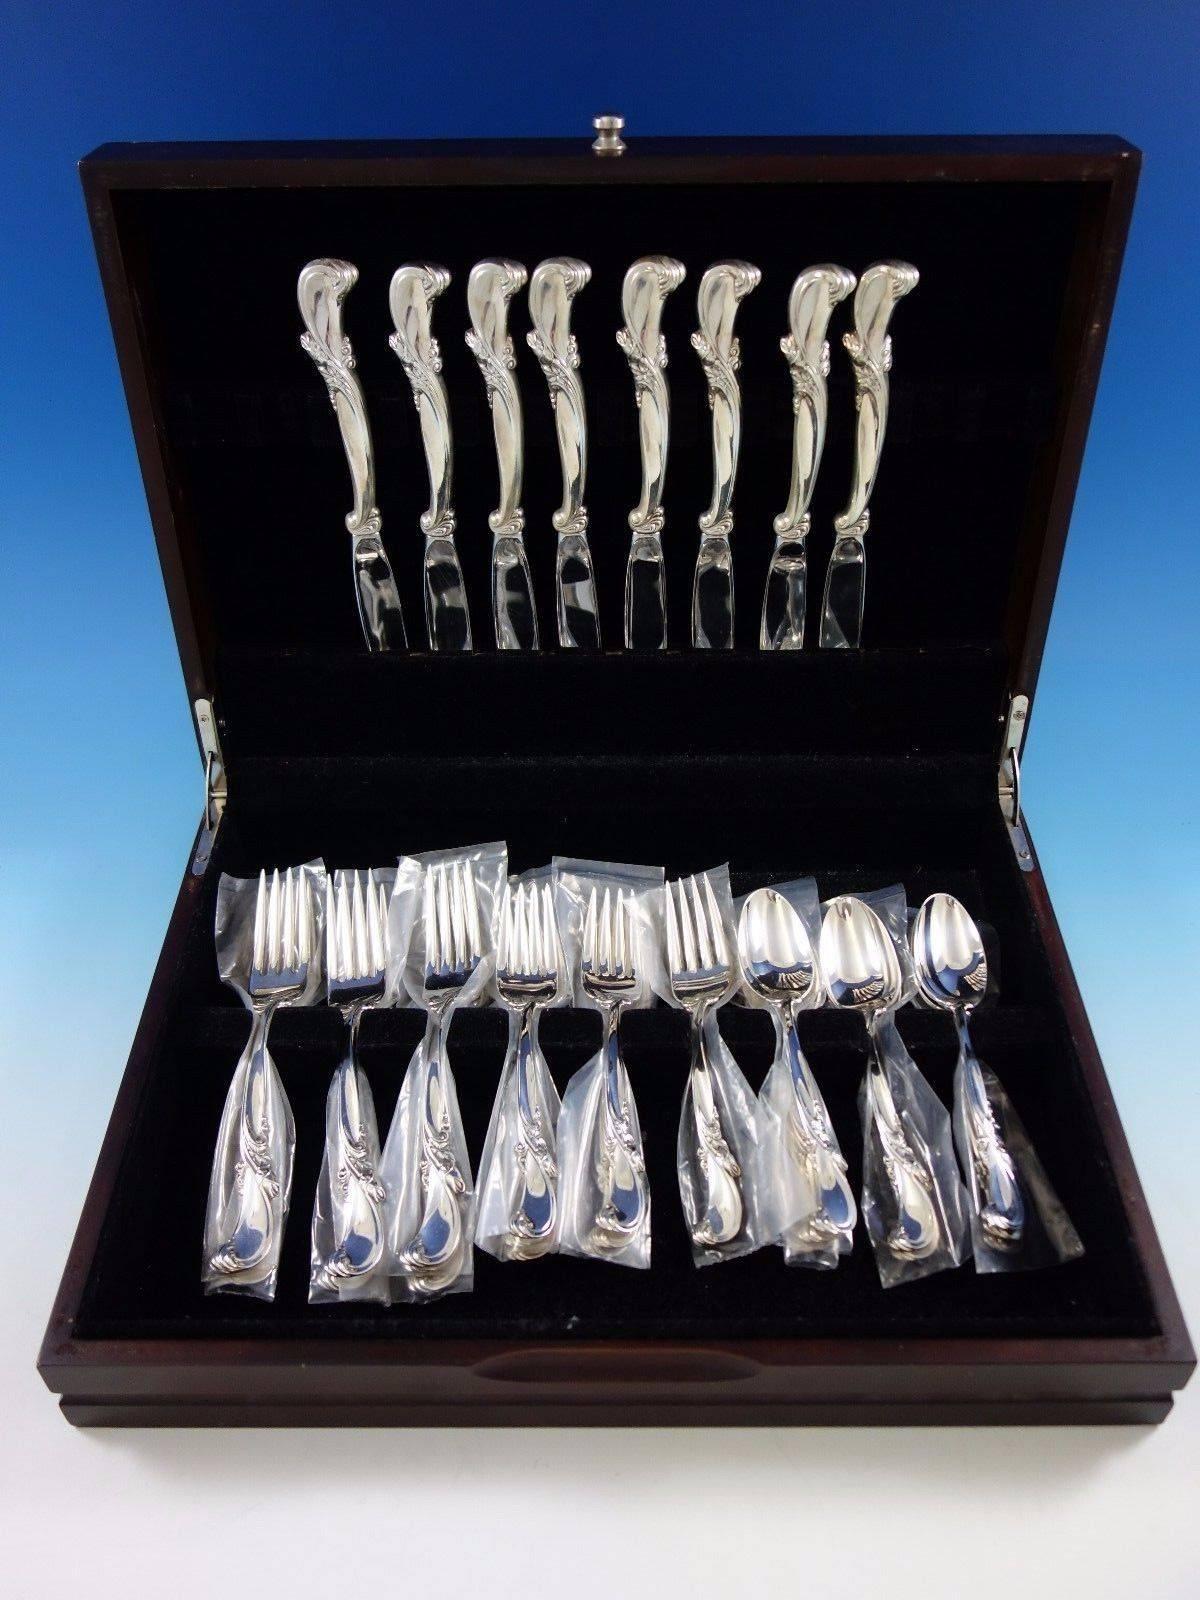 Waltz of spring by Wallace sterling silver flatware set, 32 pieces. This set includes: 

eight knives, 8 5/8